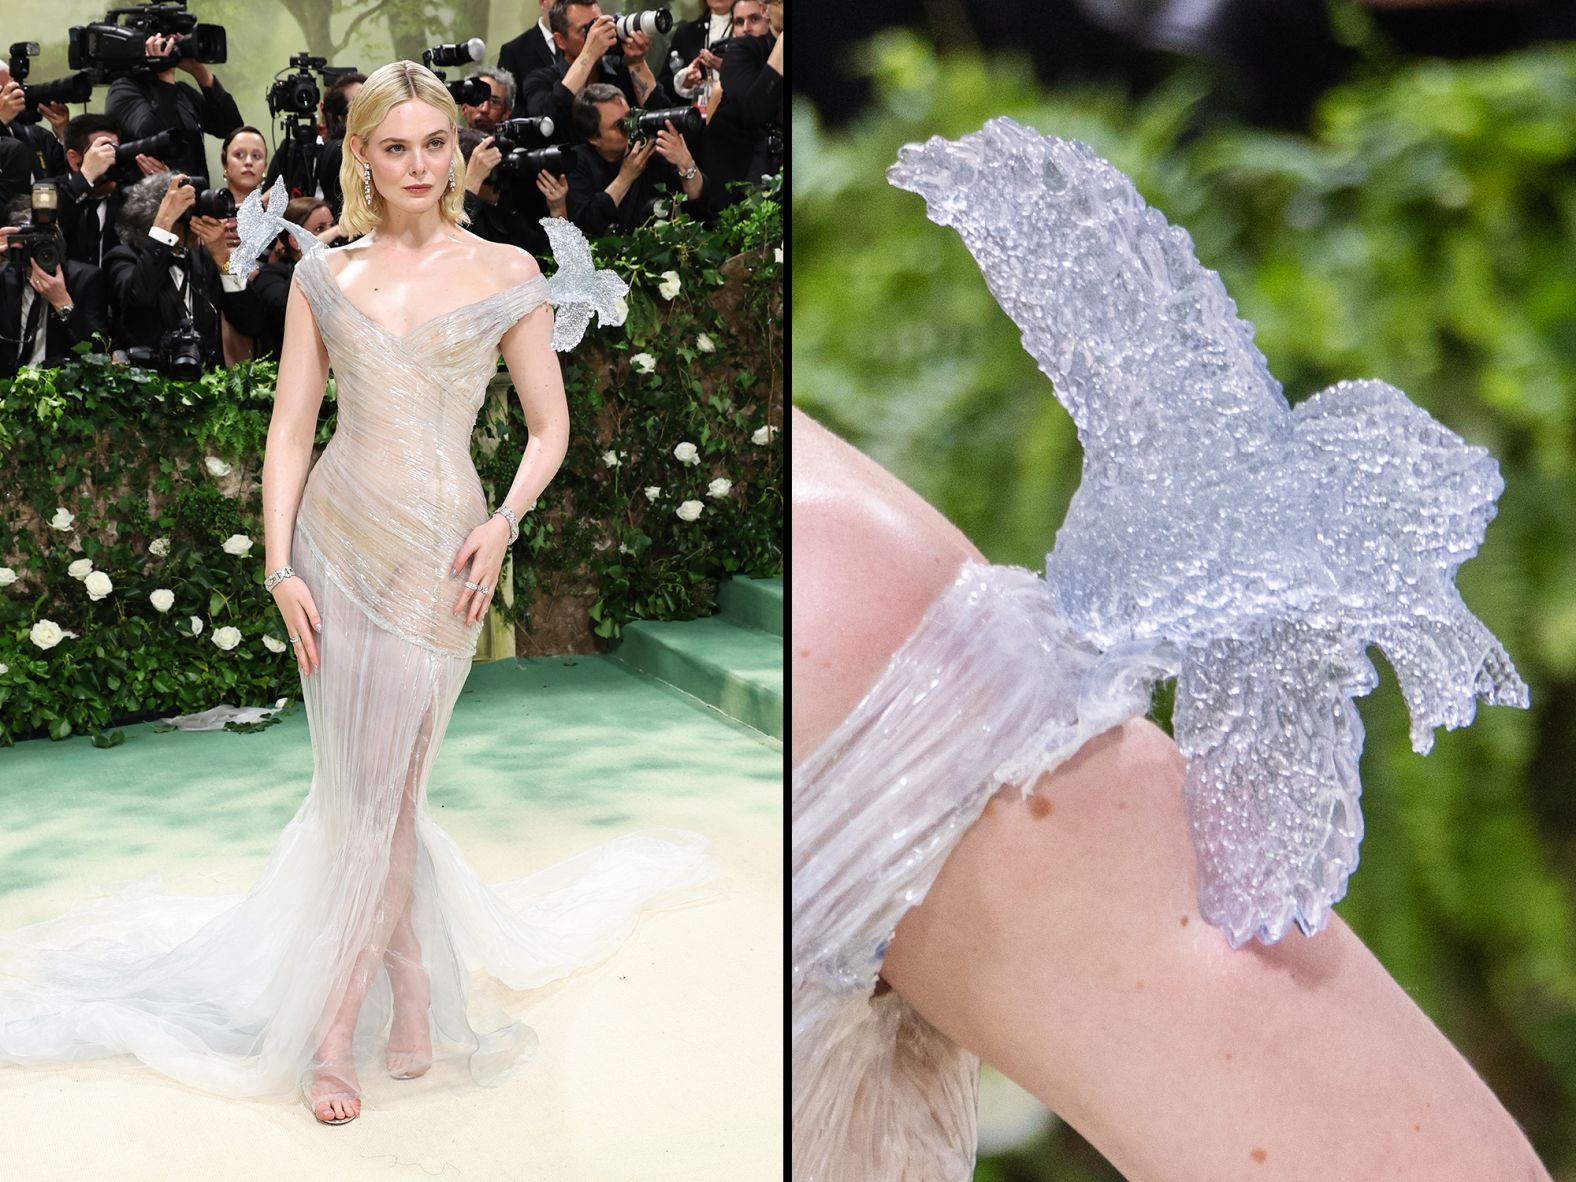 Elle Fanning in an ethereal Balmain number. The organza bustier gown is hand-covered with four layers of resin for a trompe-l'oeil glass effect and features an illusion of fabric lifted by two birds sculpted in gray-blue resin.